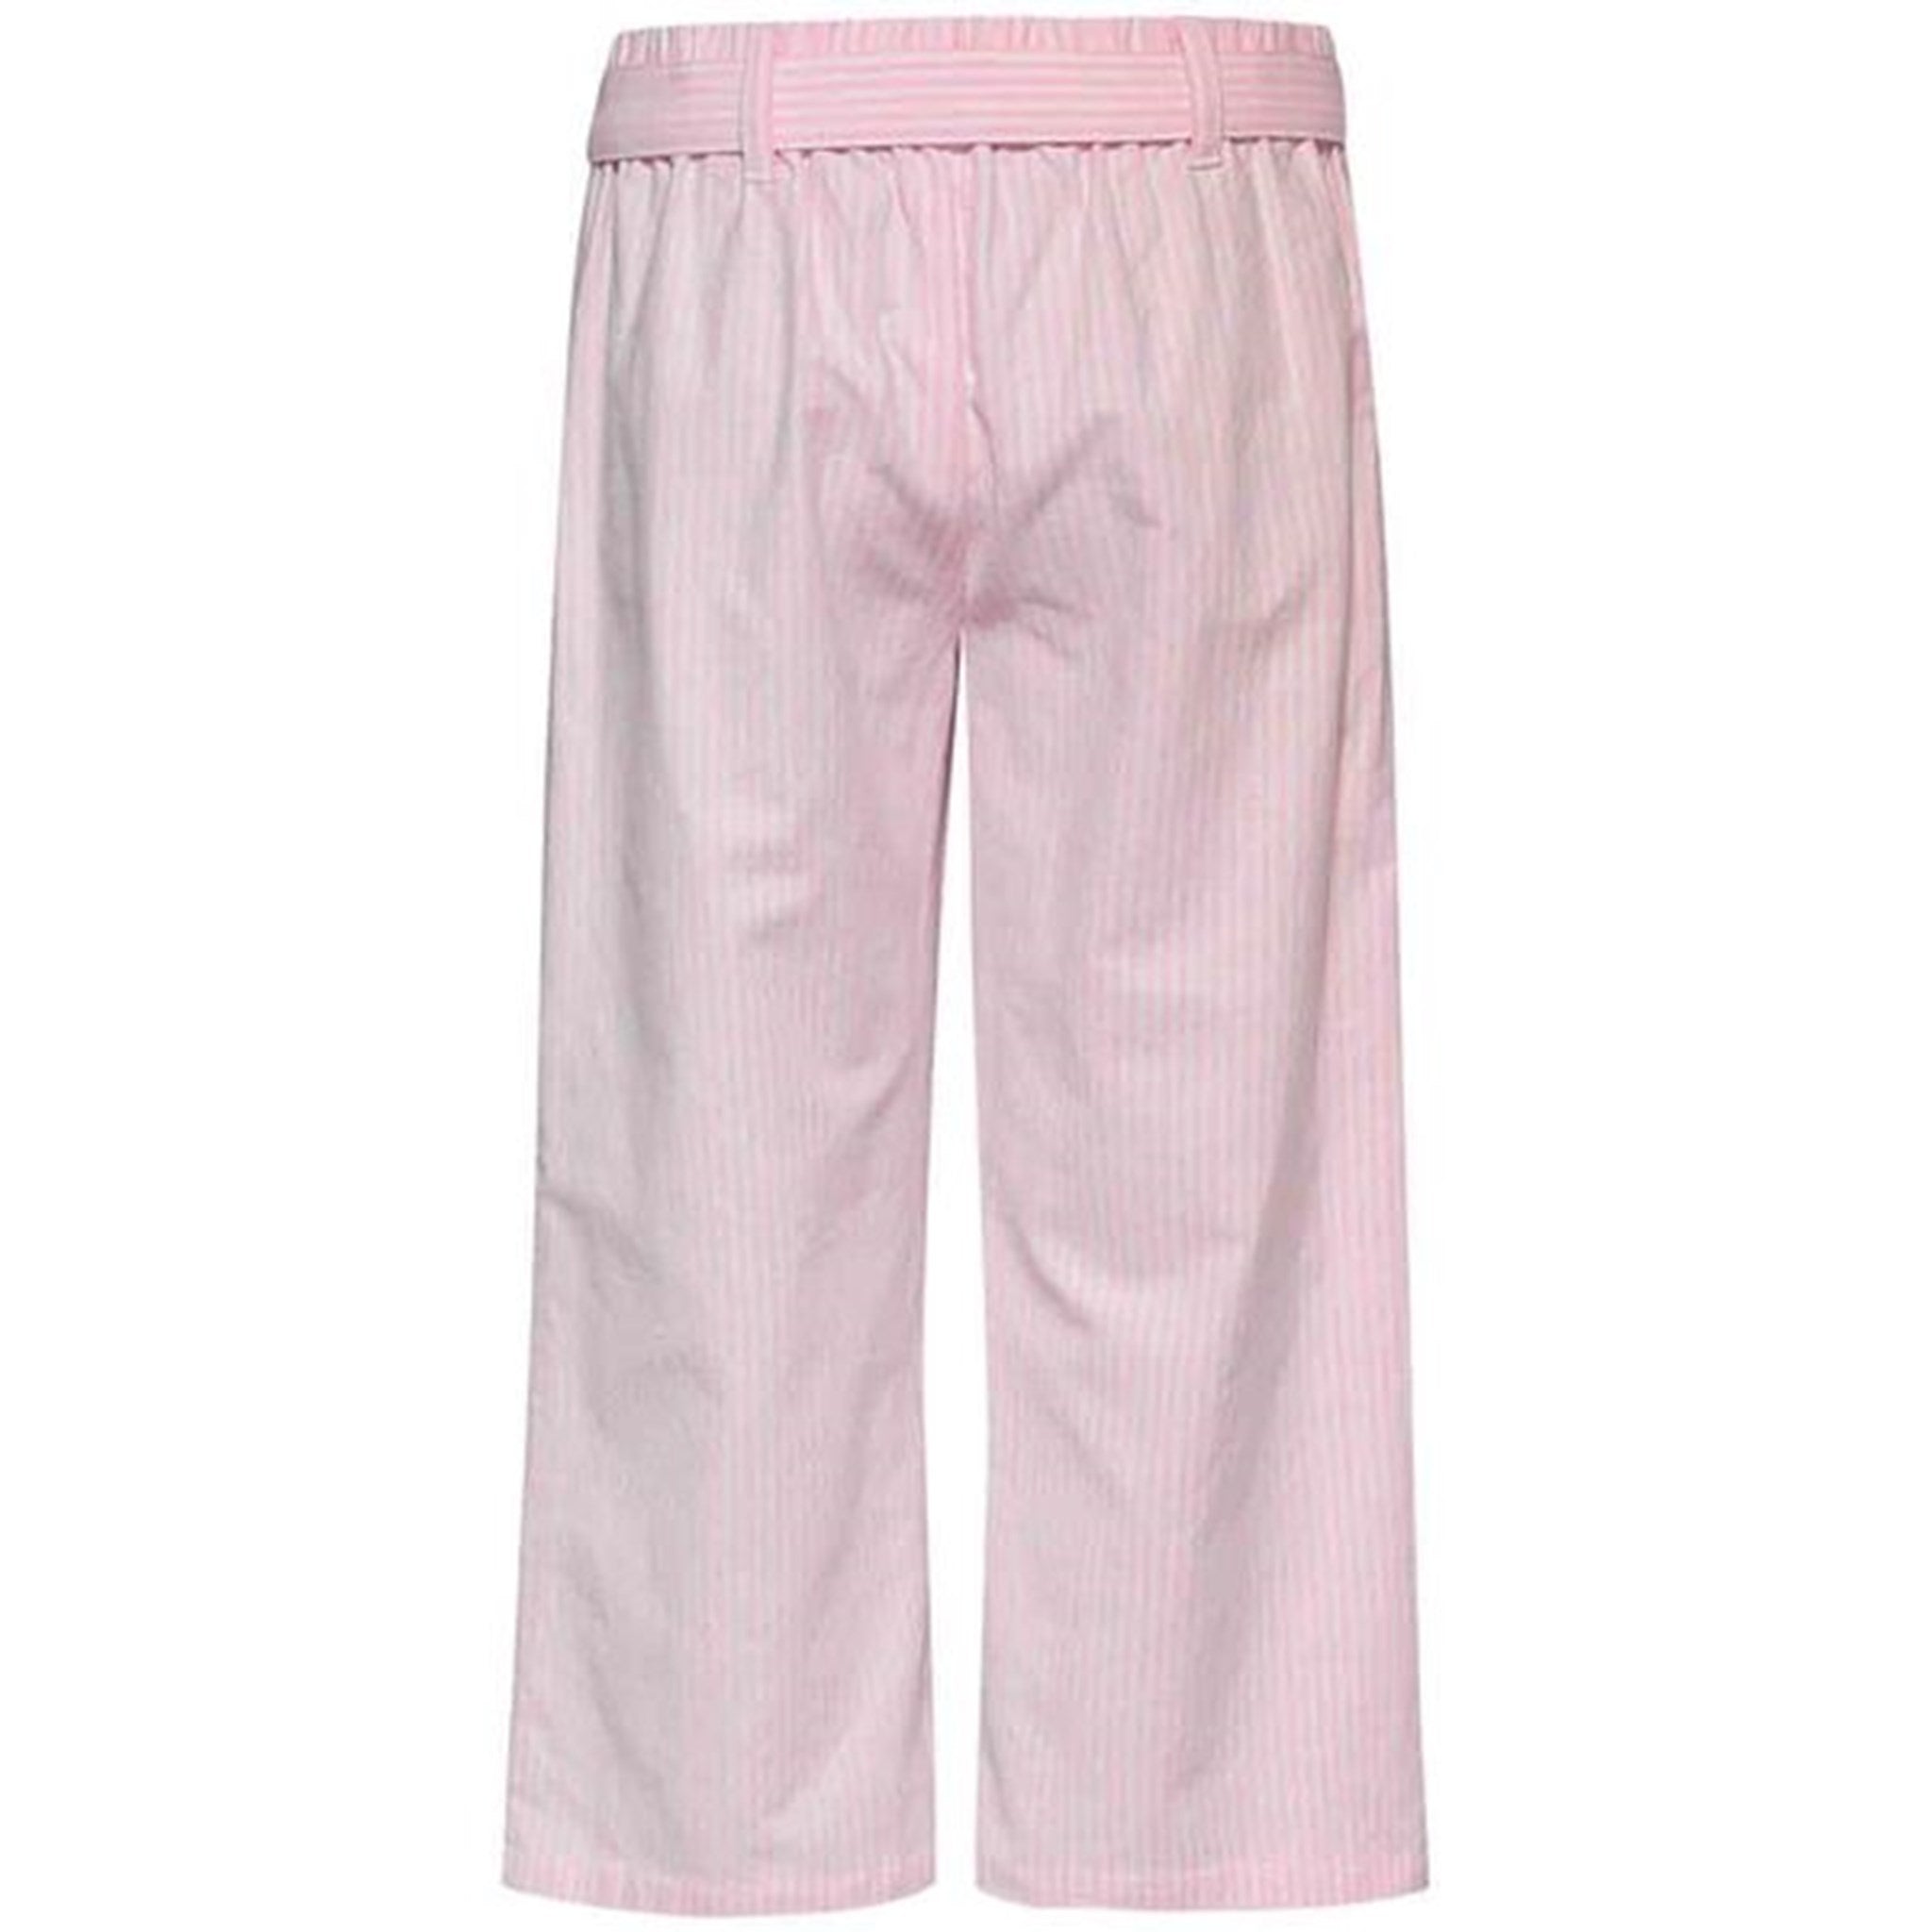 Tommy Hilfiger Neon Ithaca Stripe Pants Cotton Candy 2